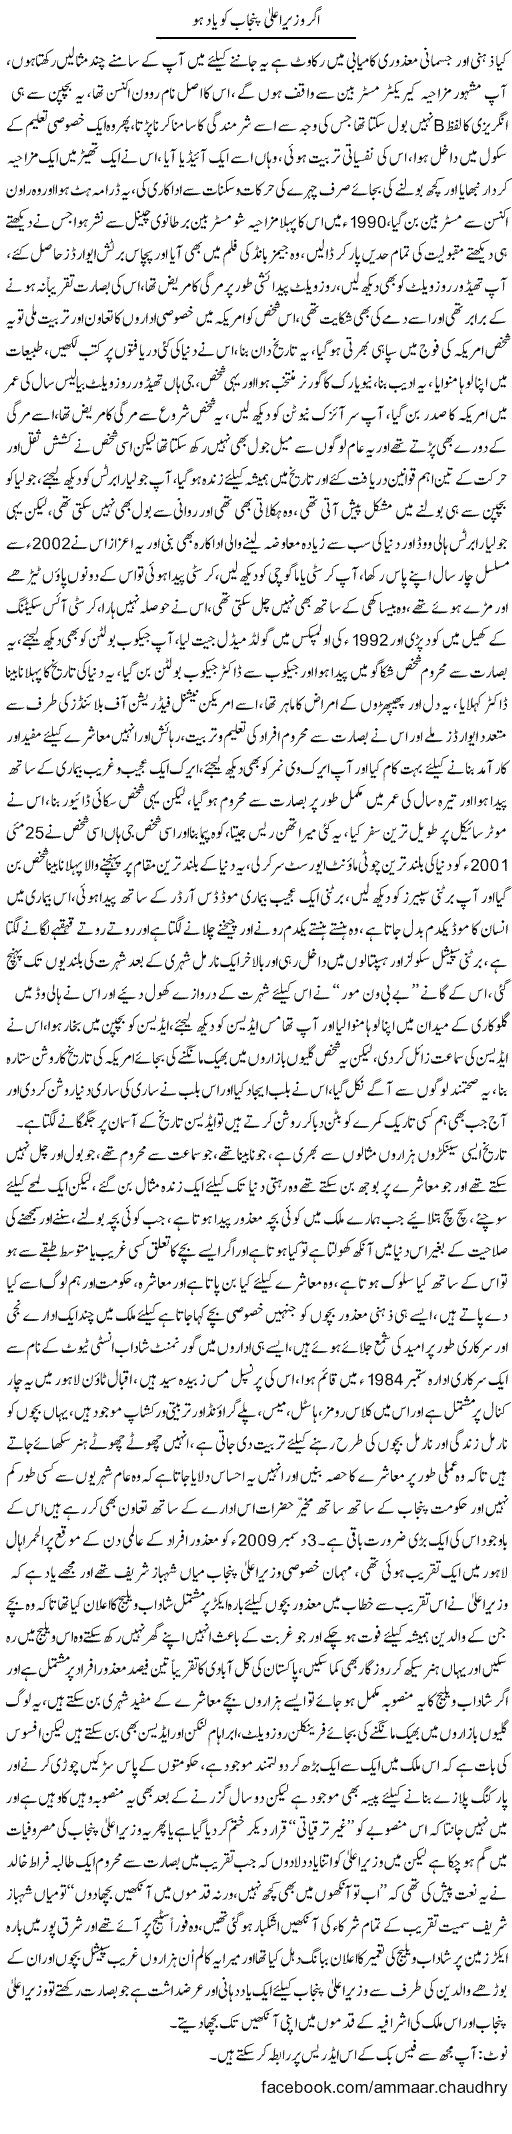 If Shahbaz Sharif Remember Express Column Amad Chaudhry 6 Feb 2011